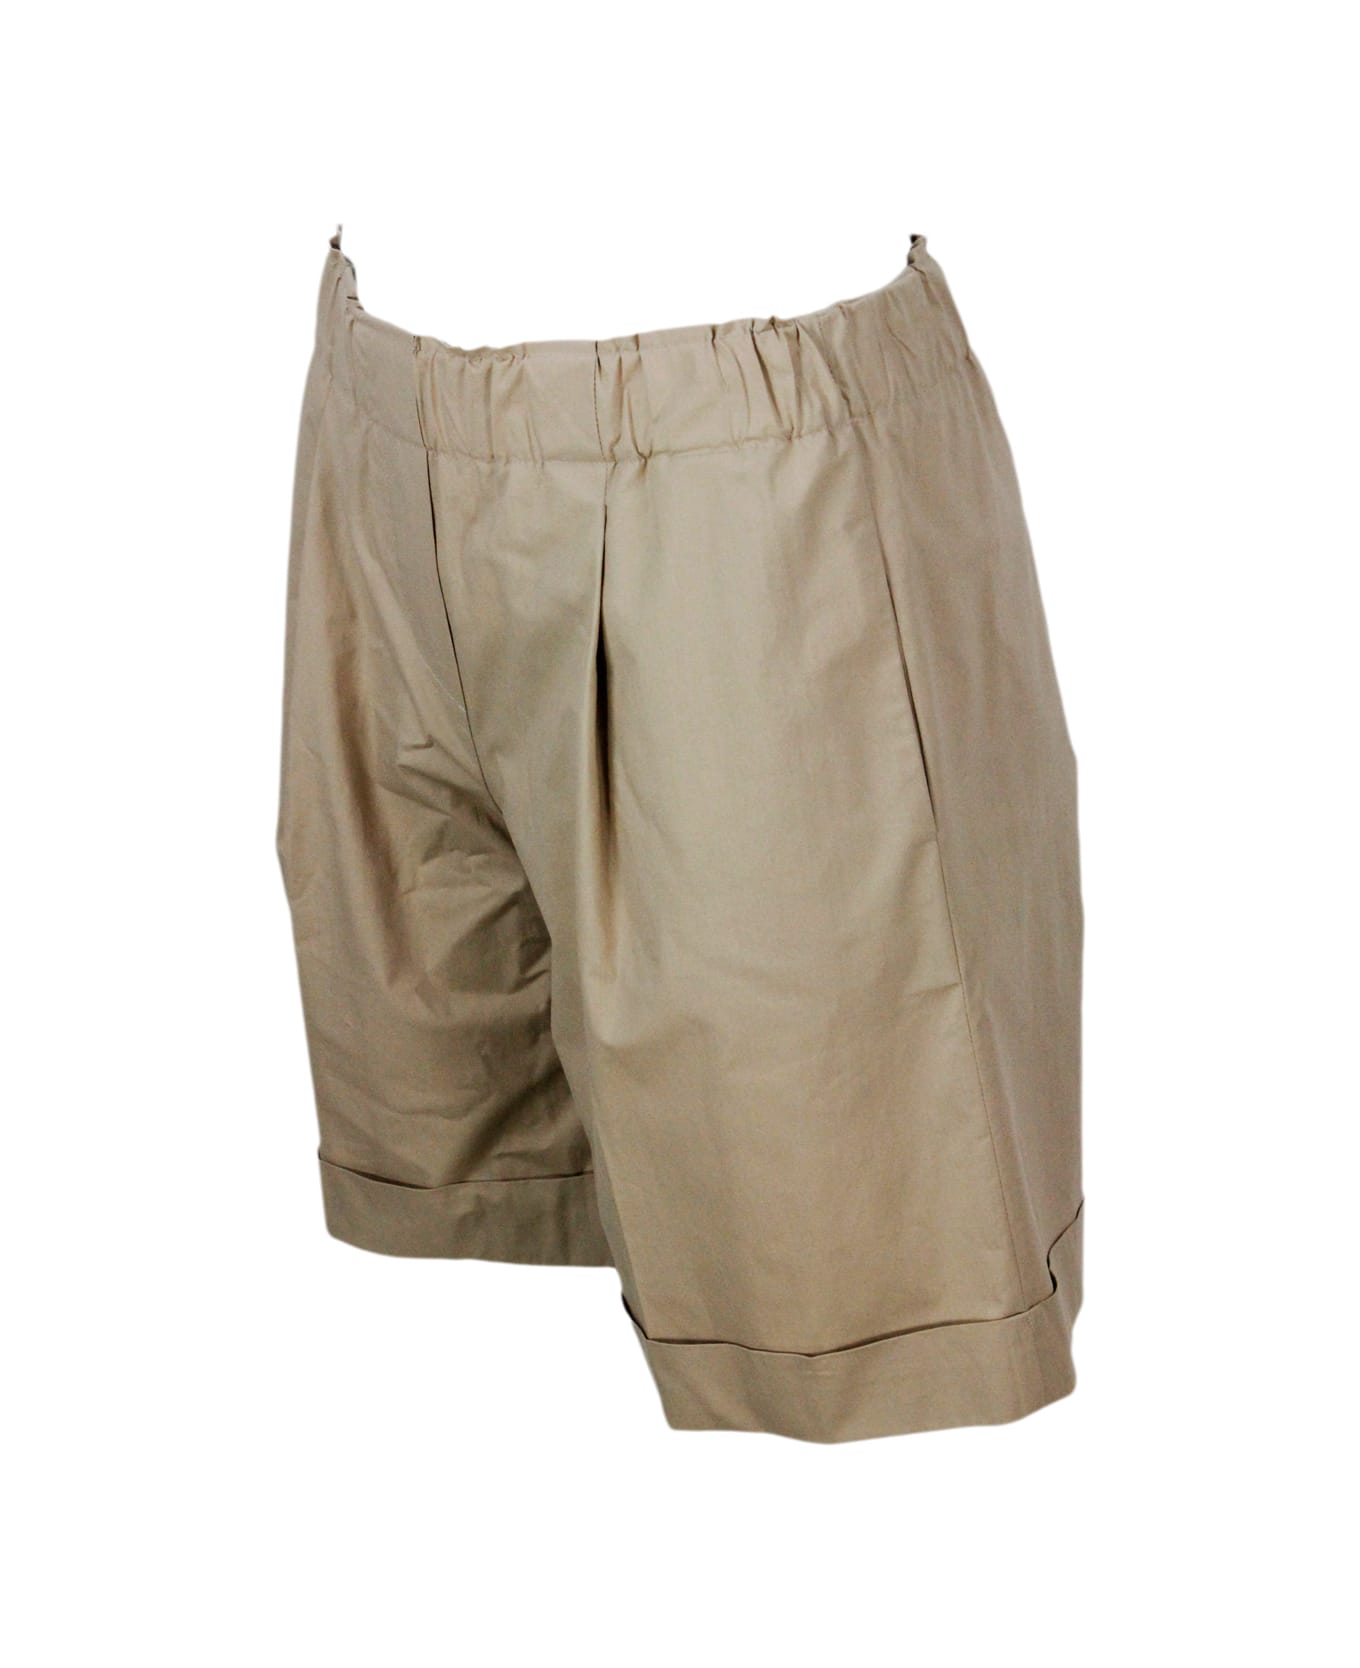 Antonelli Bermuda Shorts With Elasticated Waist And Welt Pockets With Pleats And Turn-up At The Bottom Made Of Stretch Cotton - Beige ショートパンツ